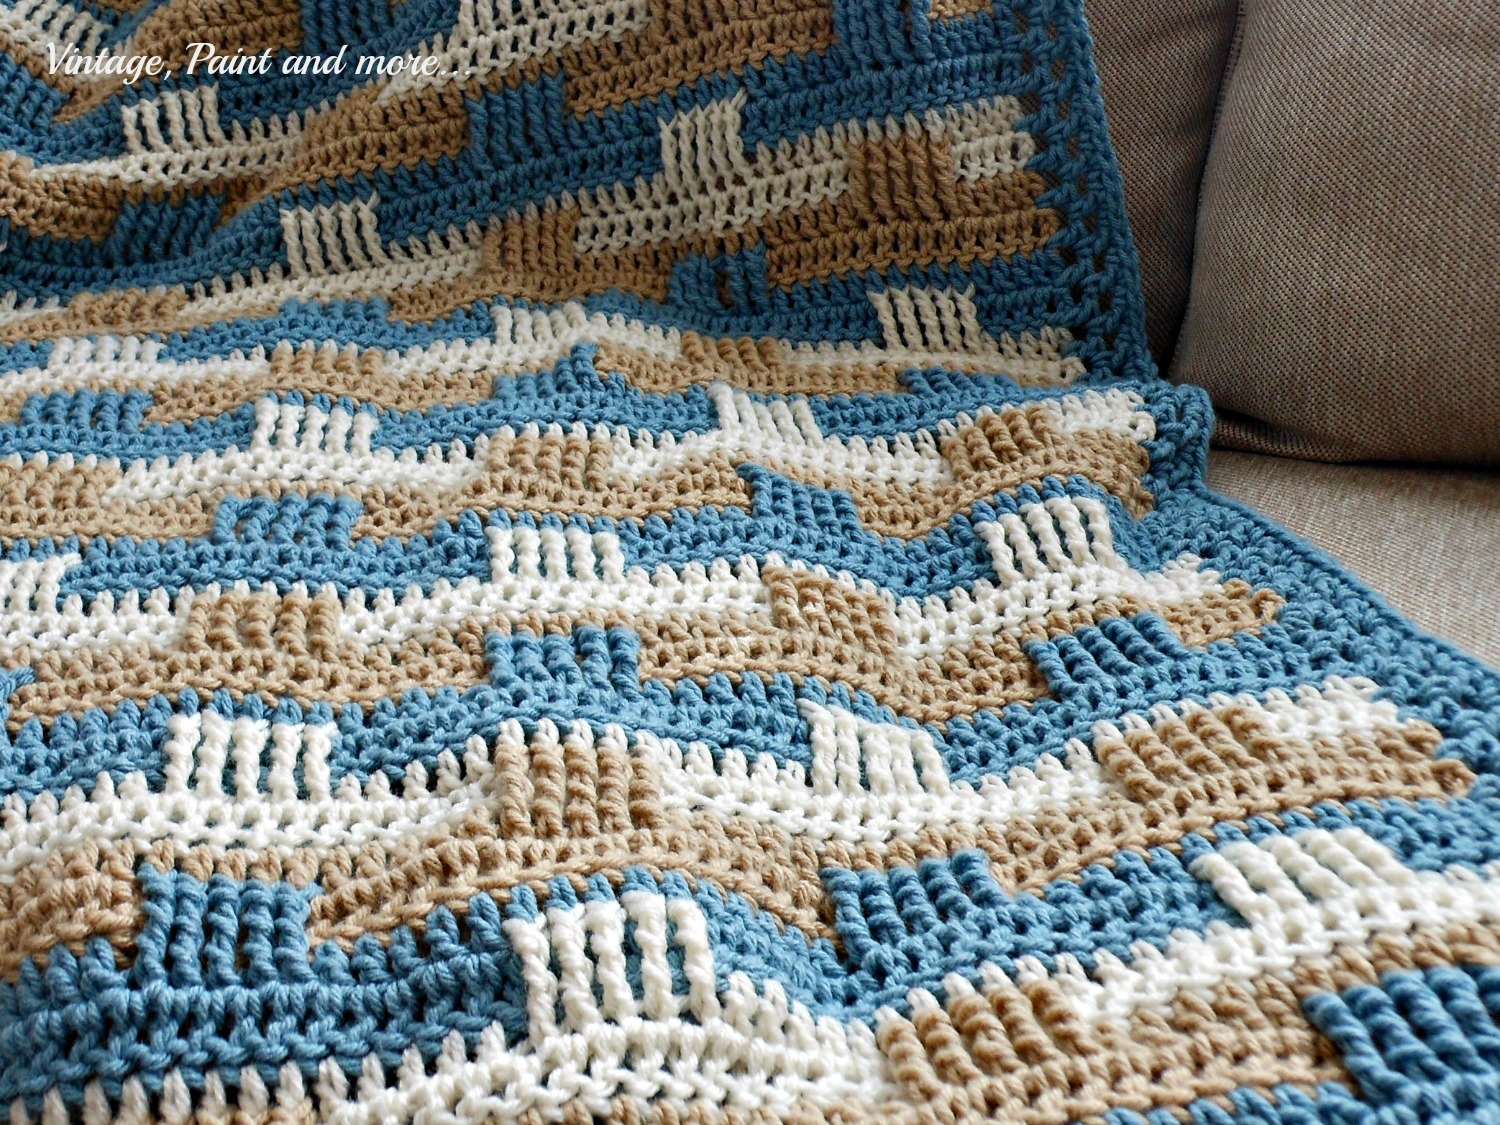 Crochet Afghan And Stenciled Pillow | Vintage, Paint And More...